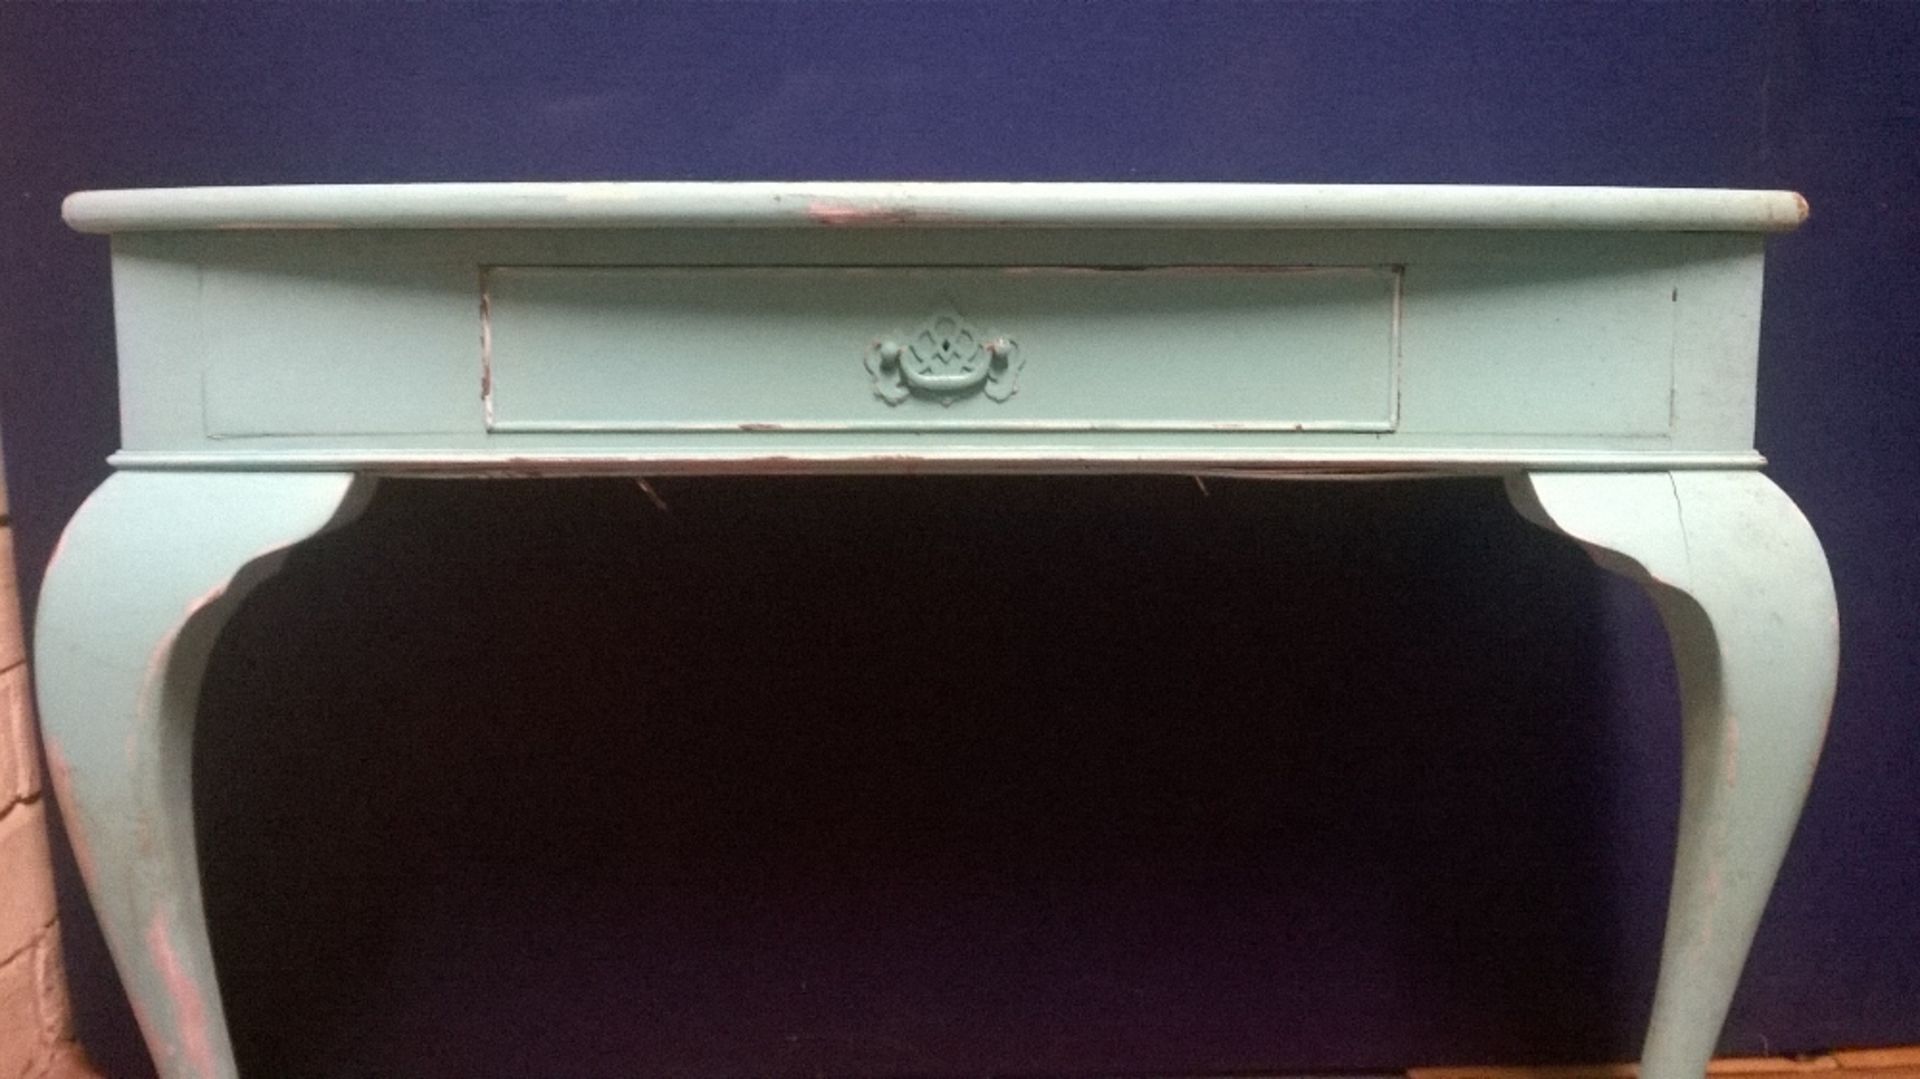 Shabby Chic Painted Wooden Salon Styling Station / Console Table with Single Drawer - Image 4 of 6